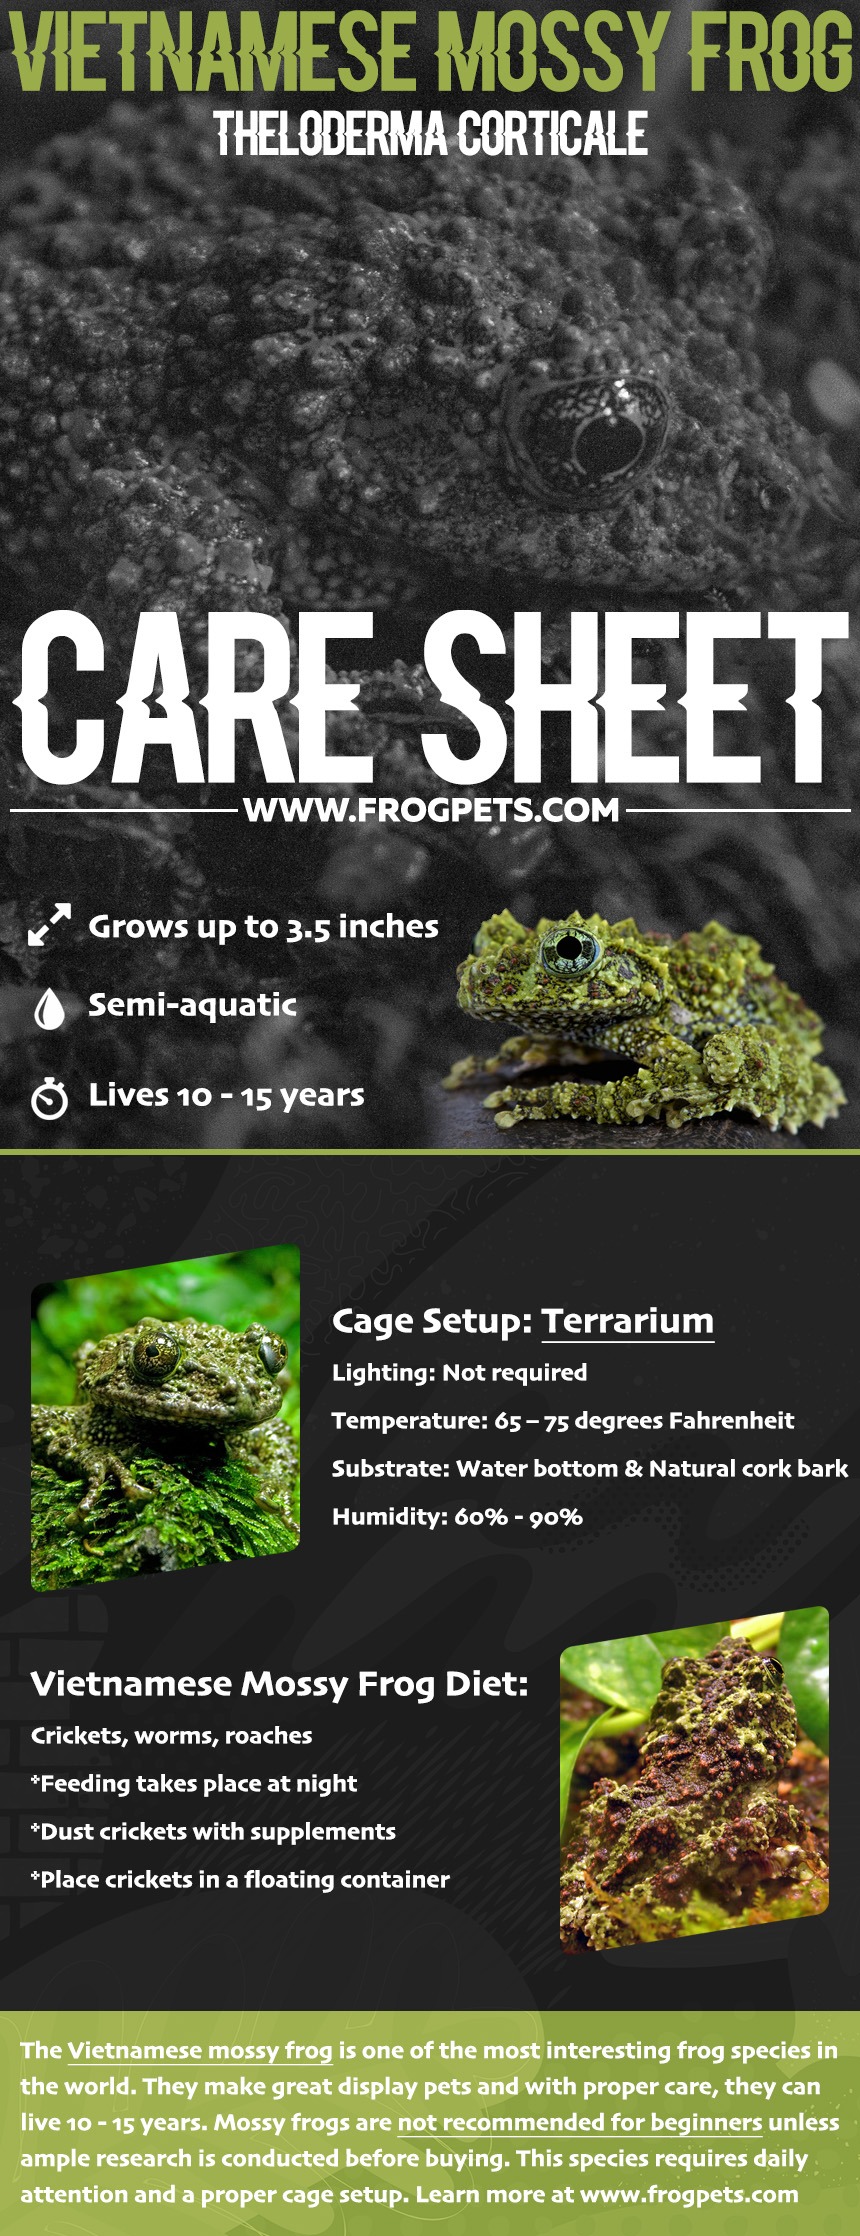 Infographic for Vietnamese Mossy Frog